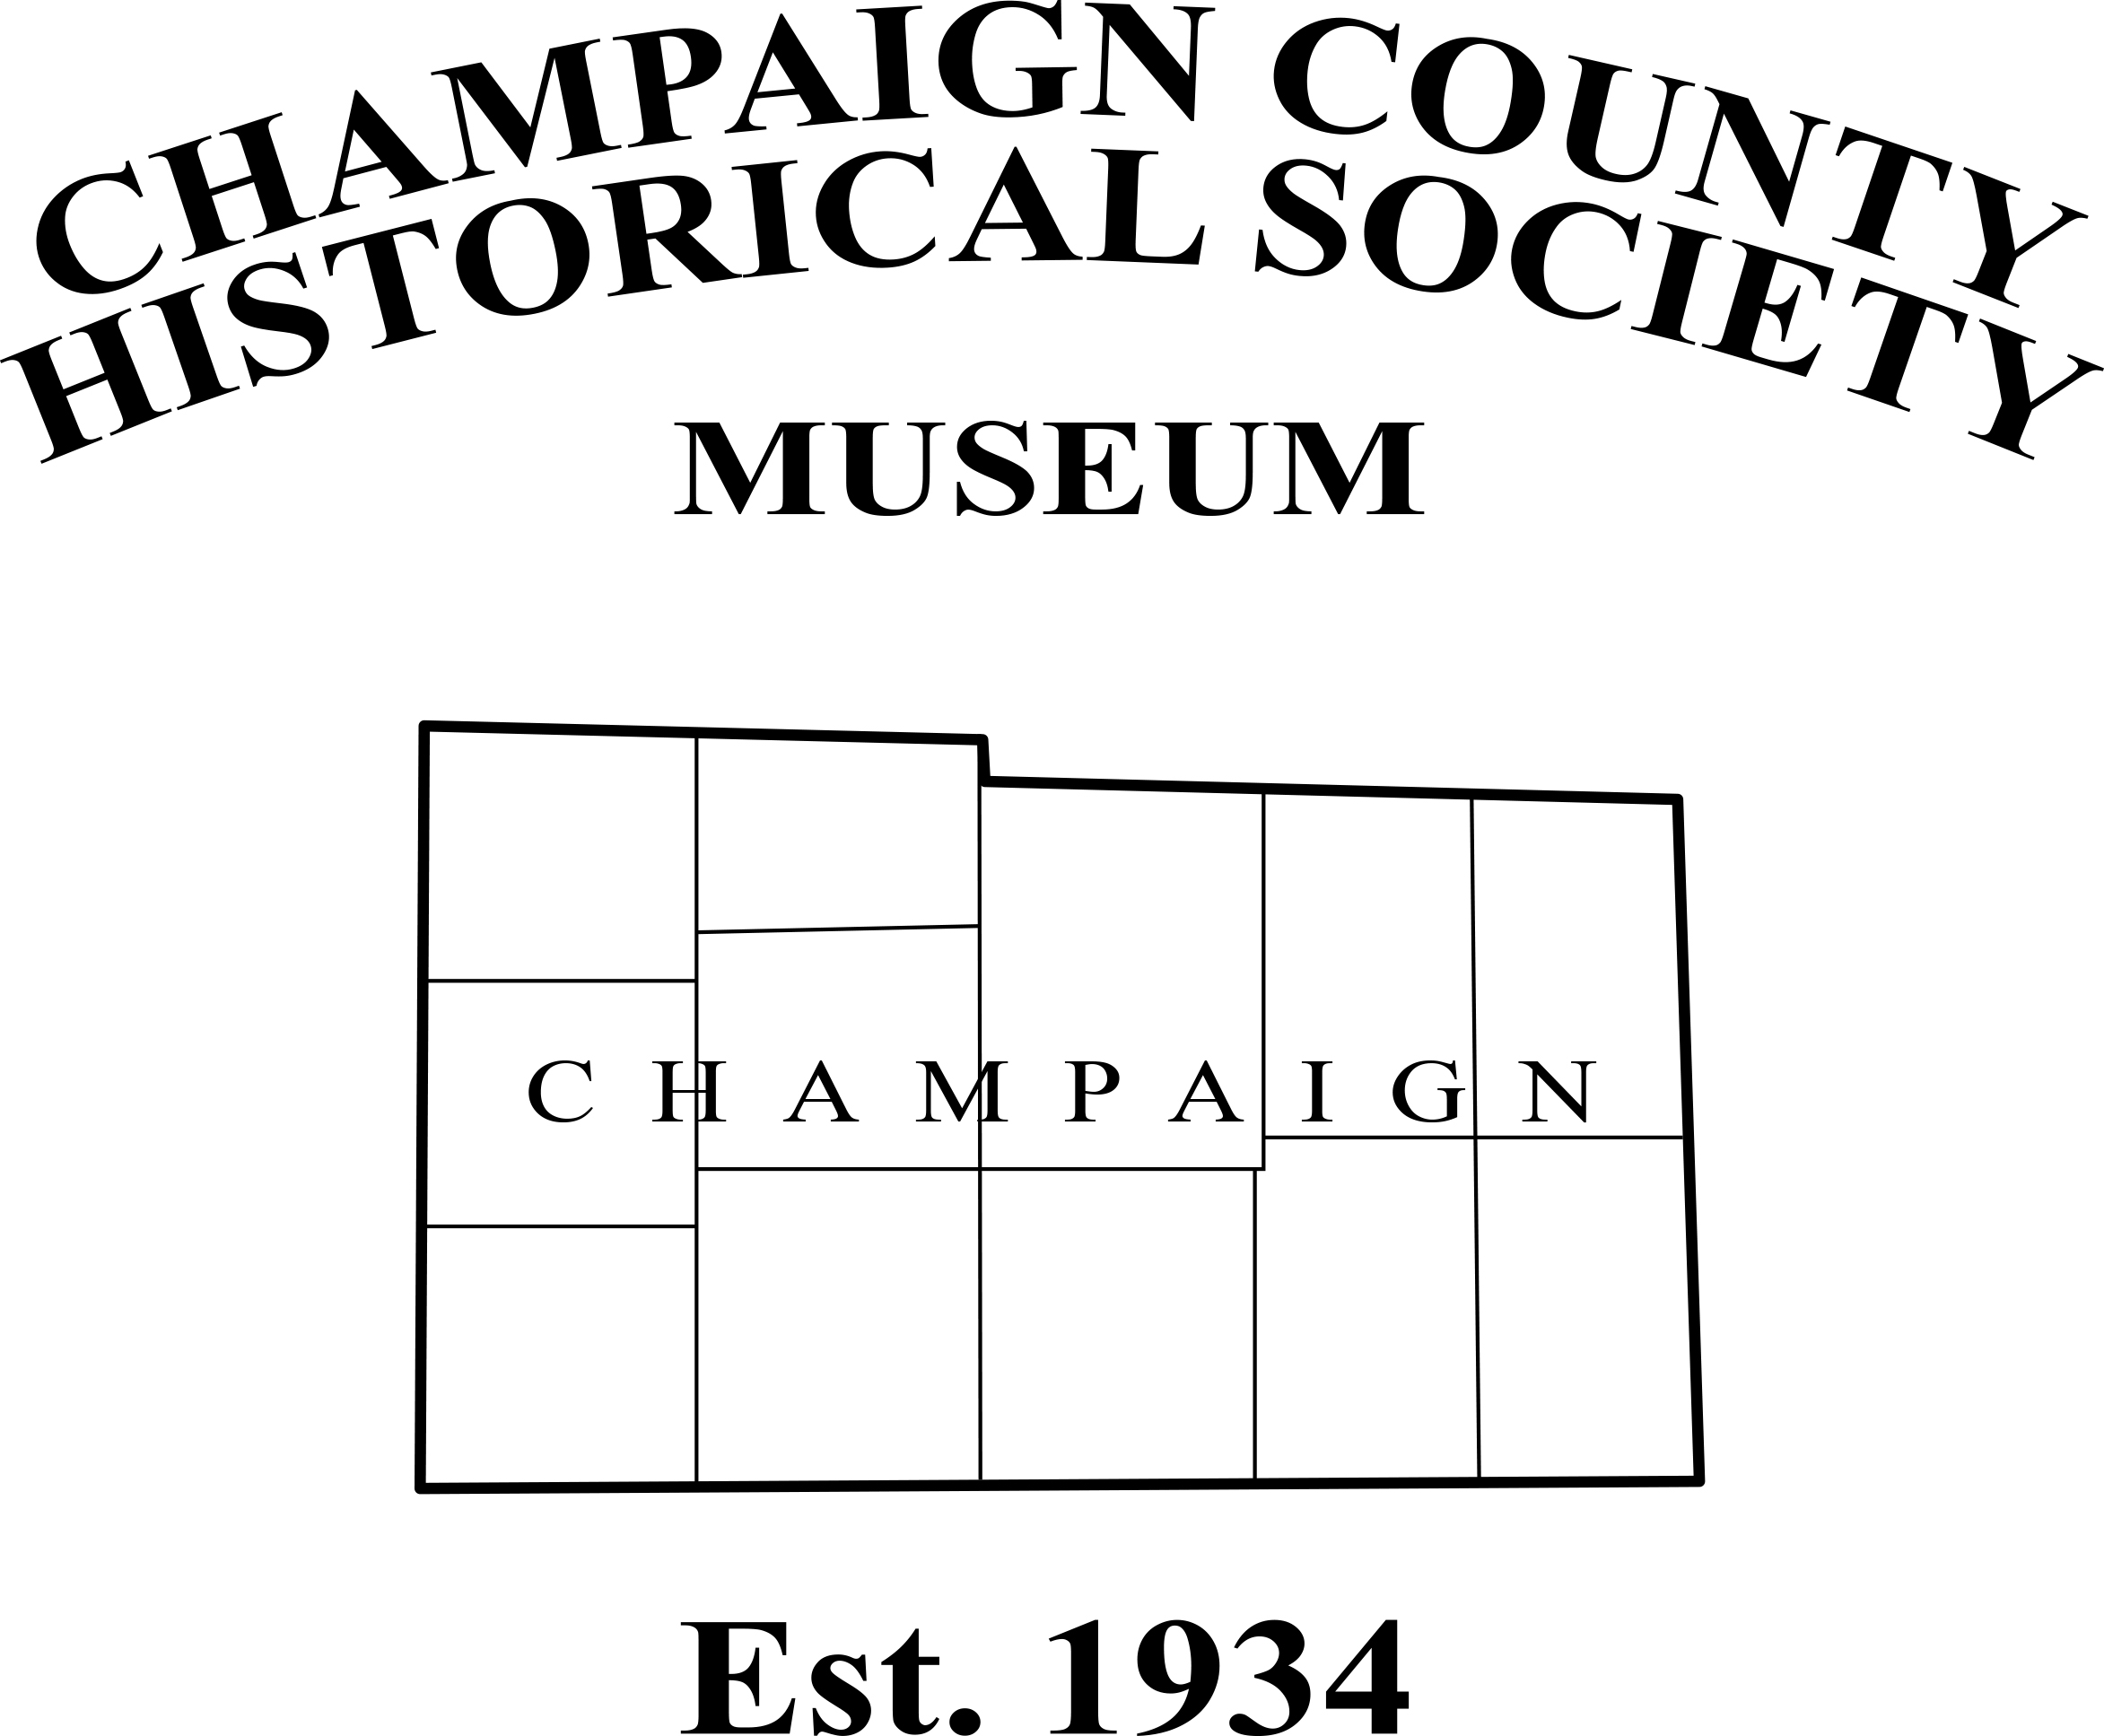 Champaign County Historical Society Museum logo